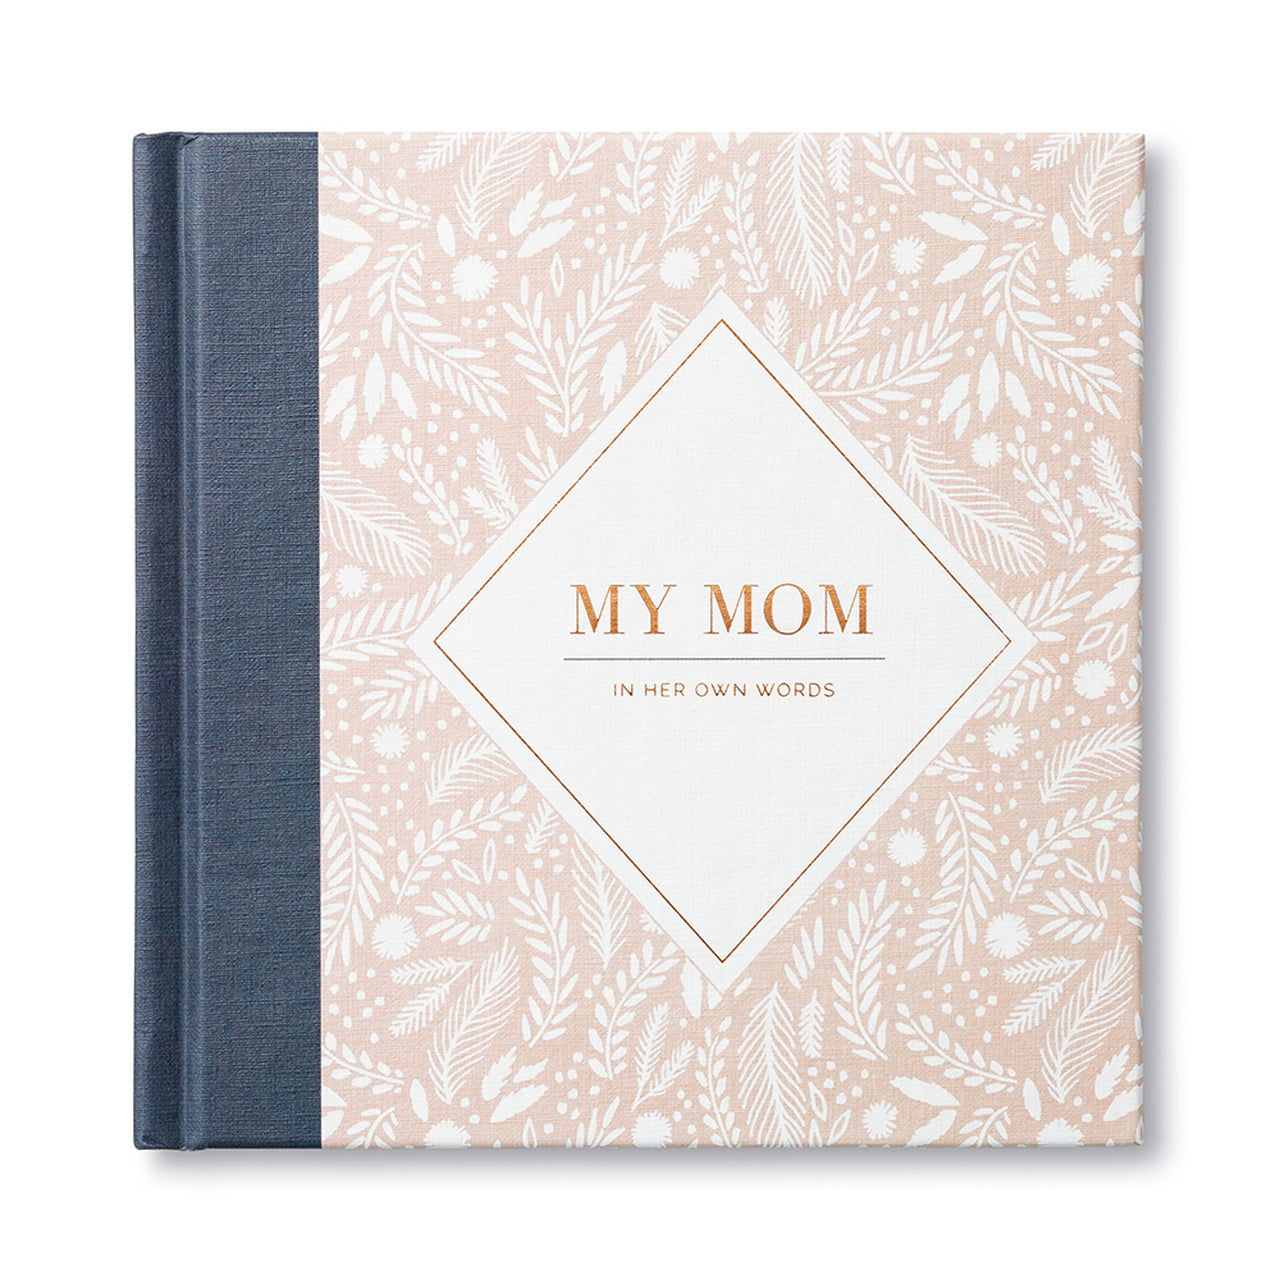 Mom Interview- "My Mom in her Own Words" Book